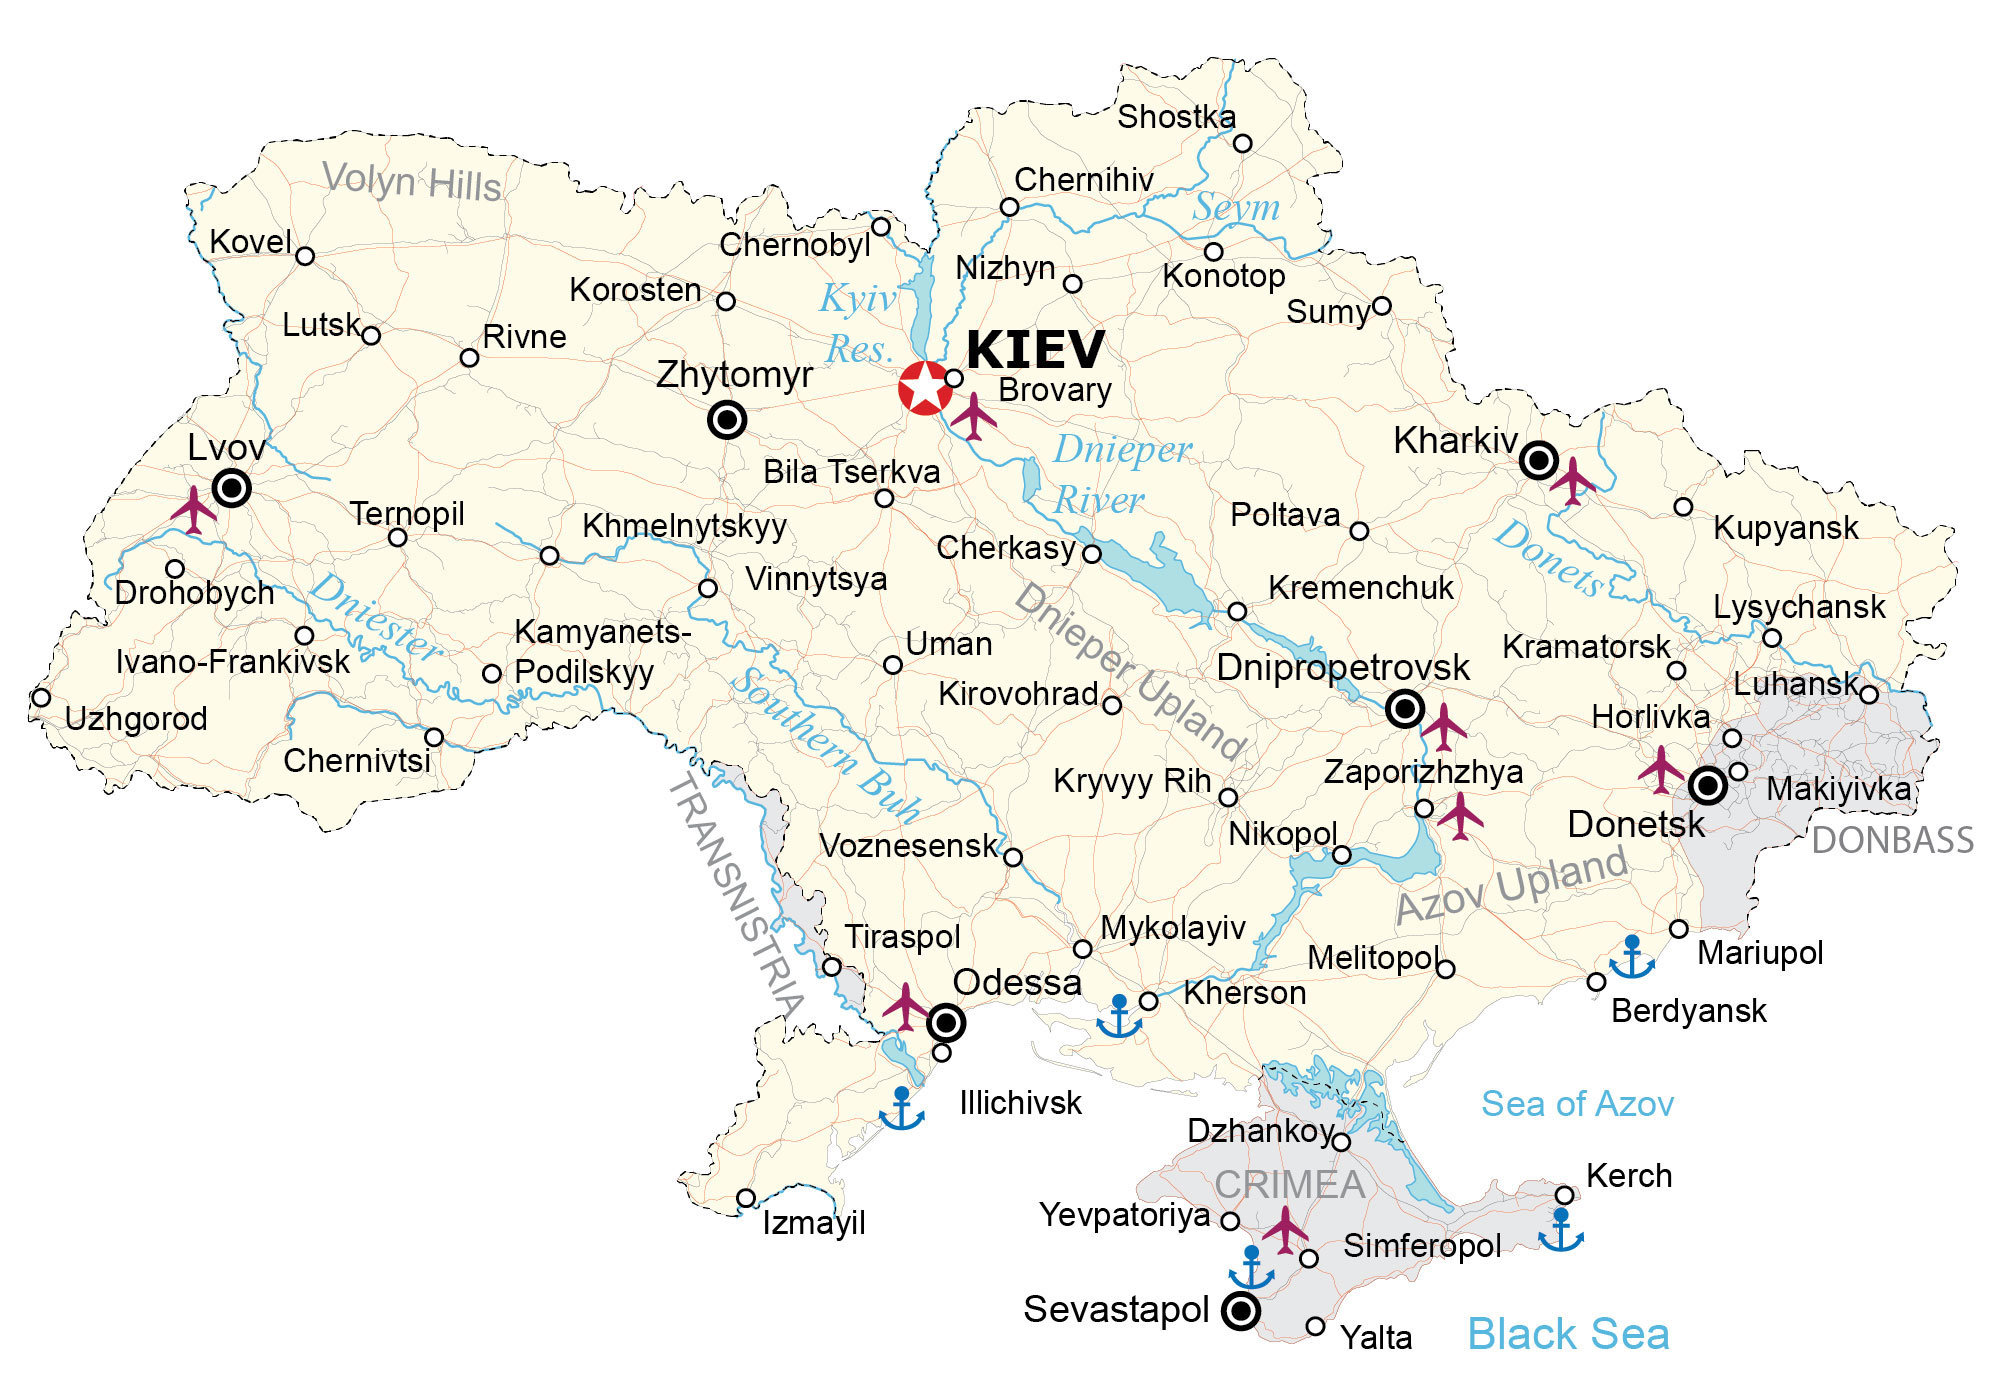 map-of-ukraine-and-cities-get-latest-map-update